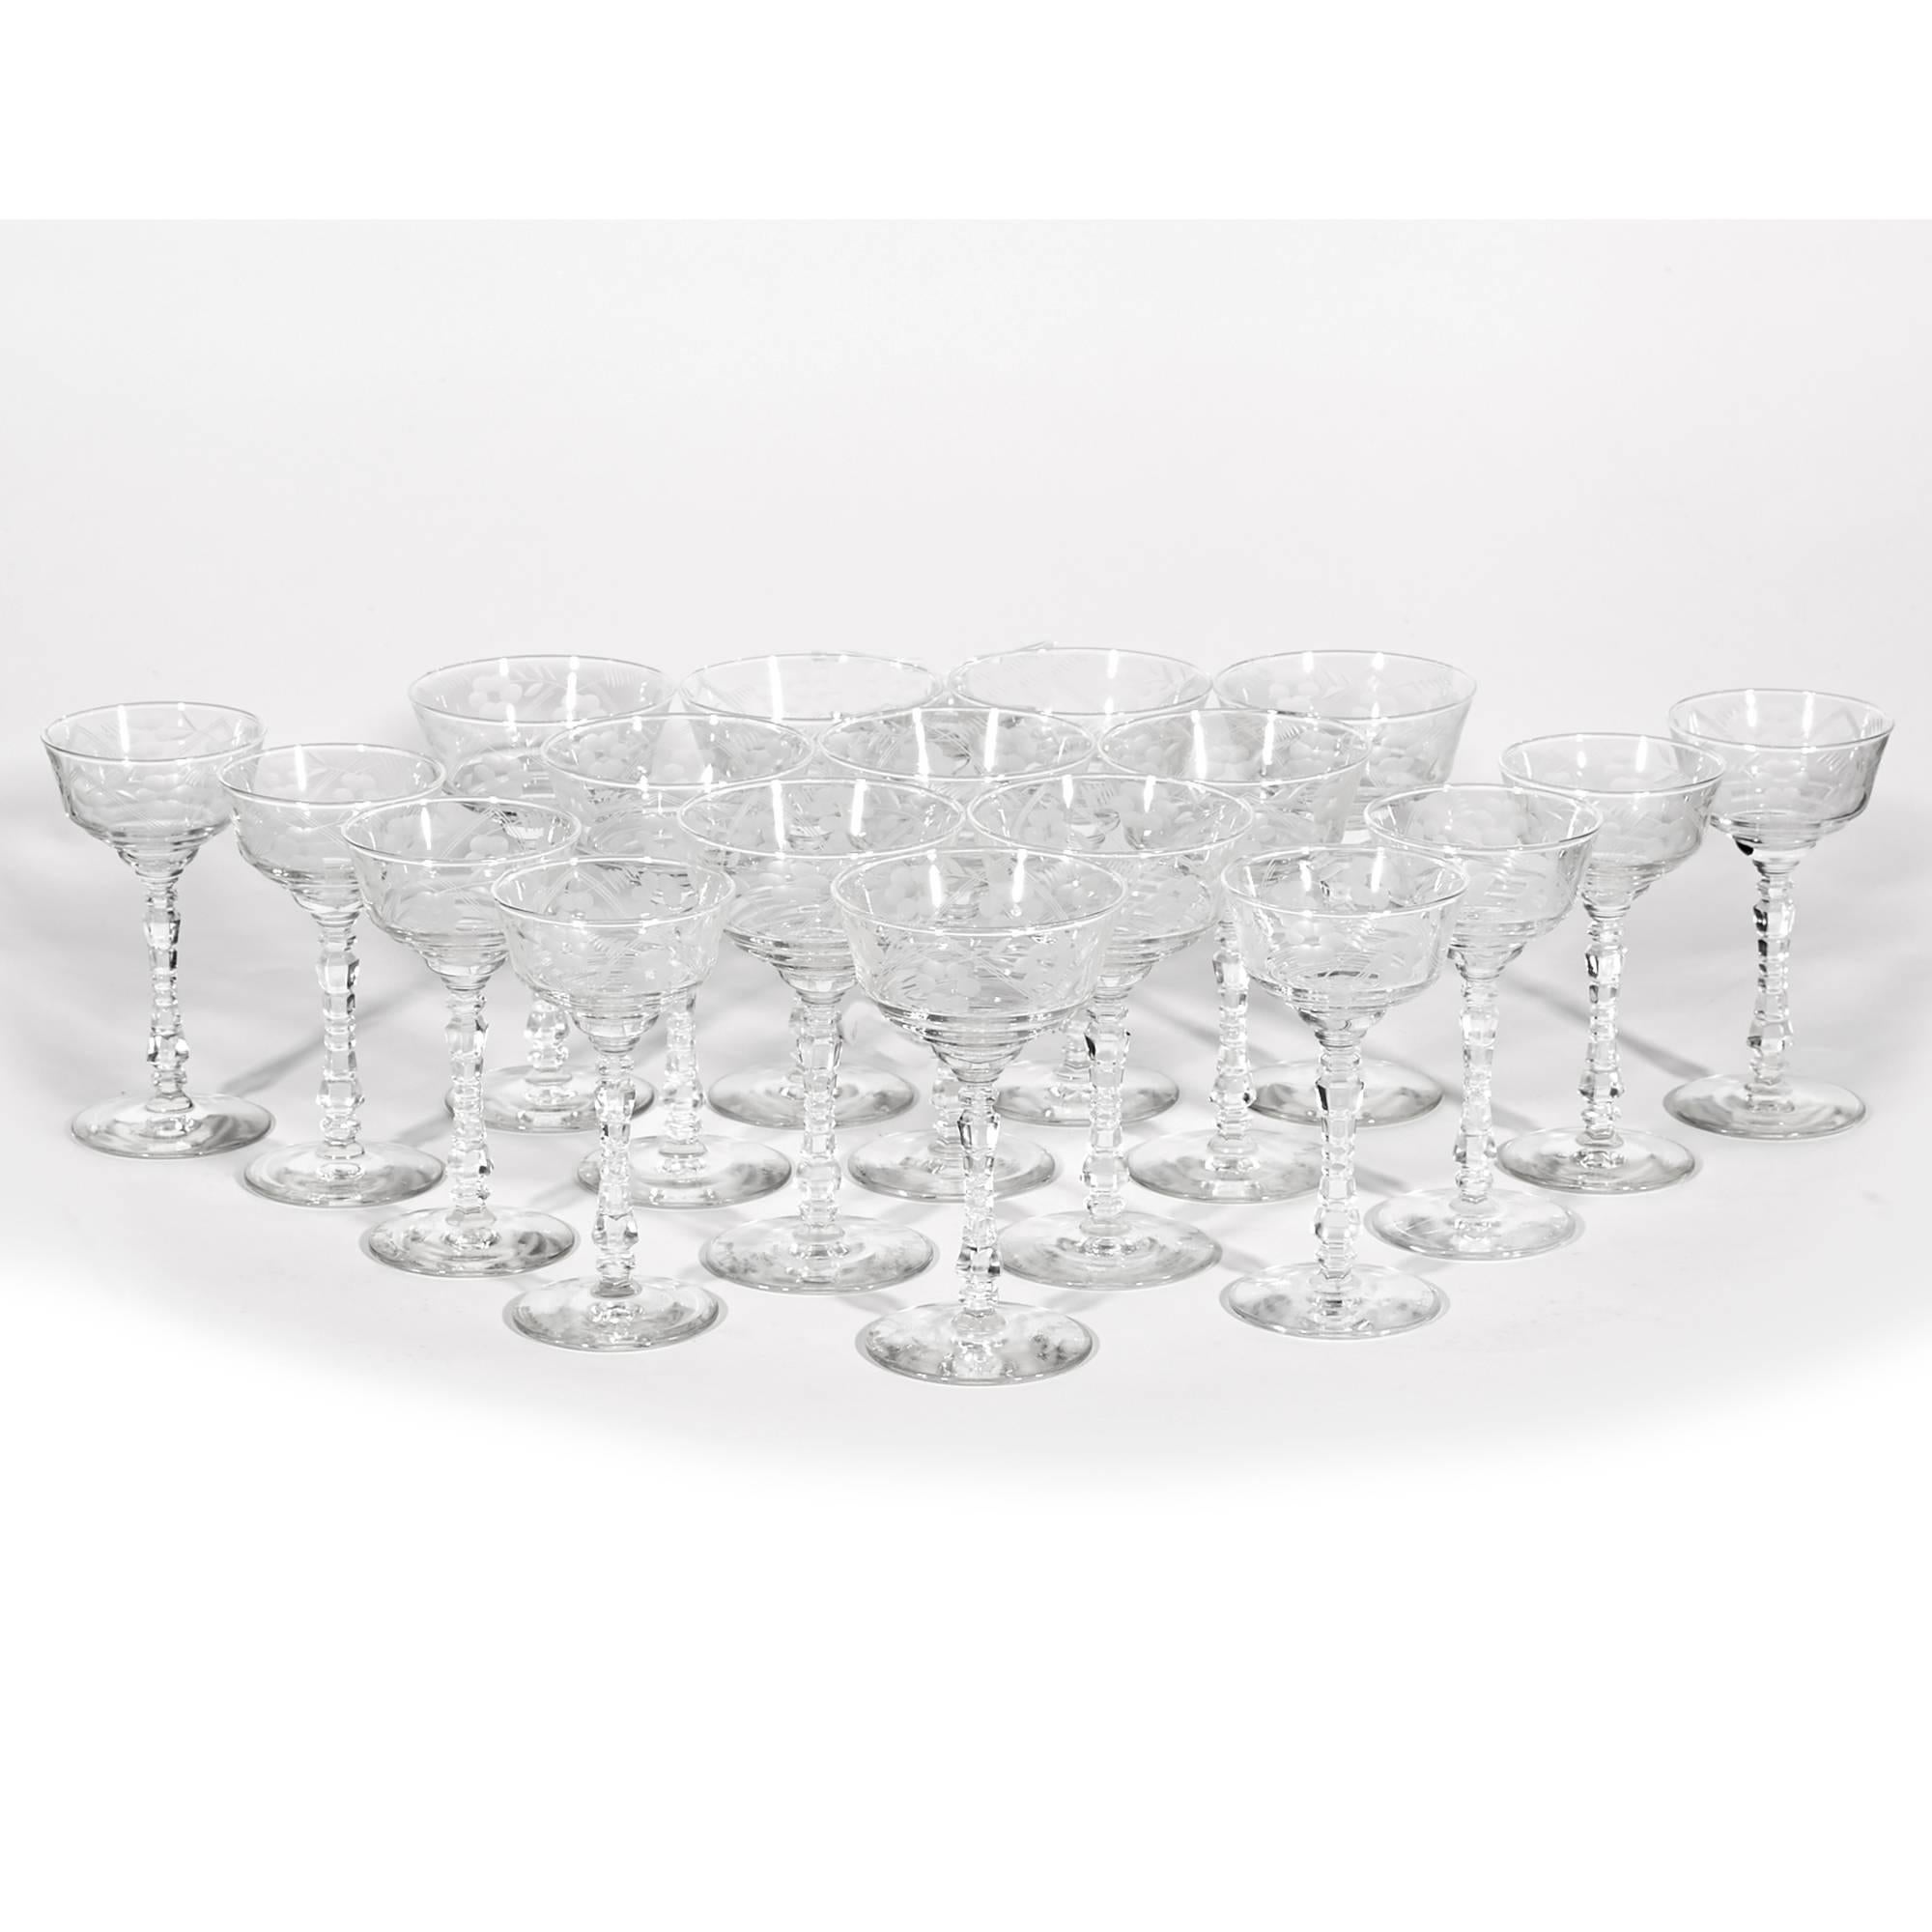 Vintage 1960s, set of 18 floral etched rock crystal coupe stems in two different sizes by Libbey Glass Co. Eight small wine coupes measures 3